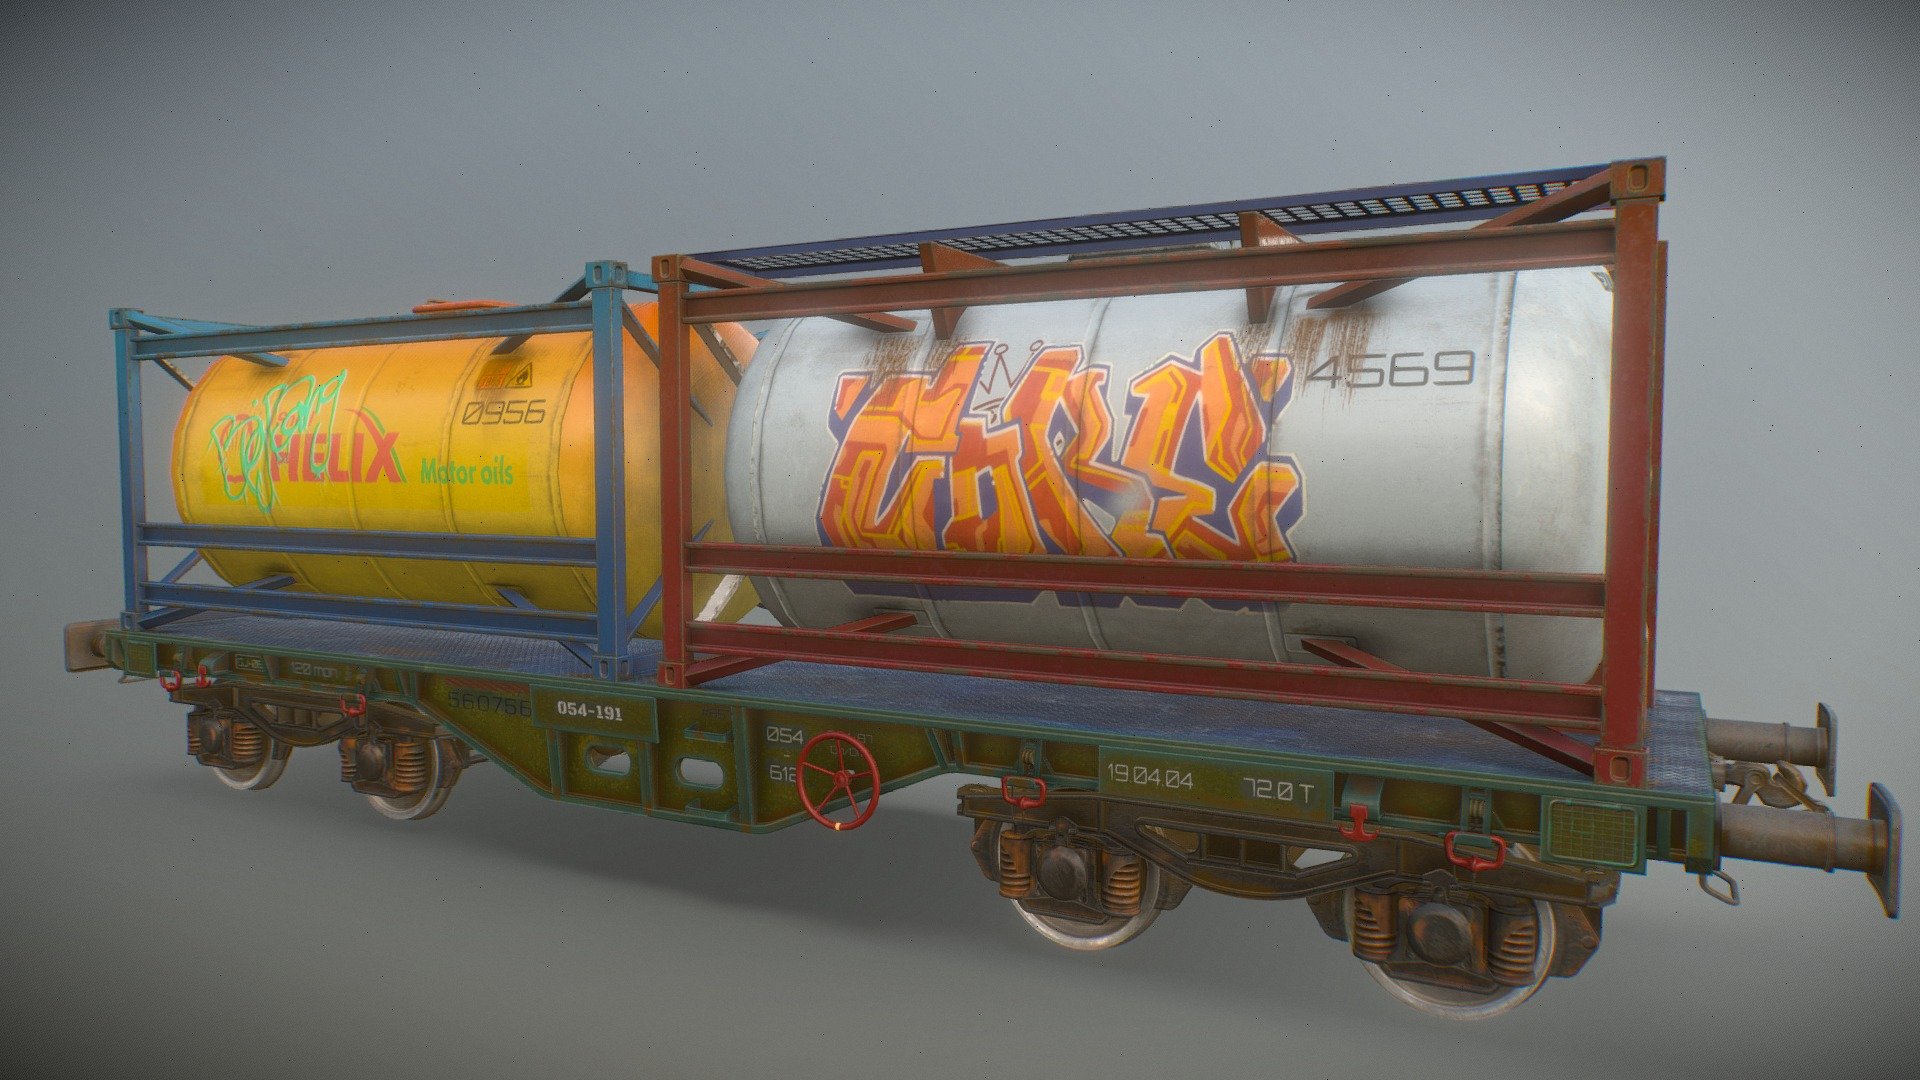 3D model of a train car, ready for games - Railway carriage (wagon) demo - Download Free 3D model by Vladimir_kizx (@kizx3d) 3d model